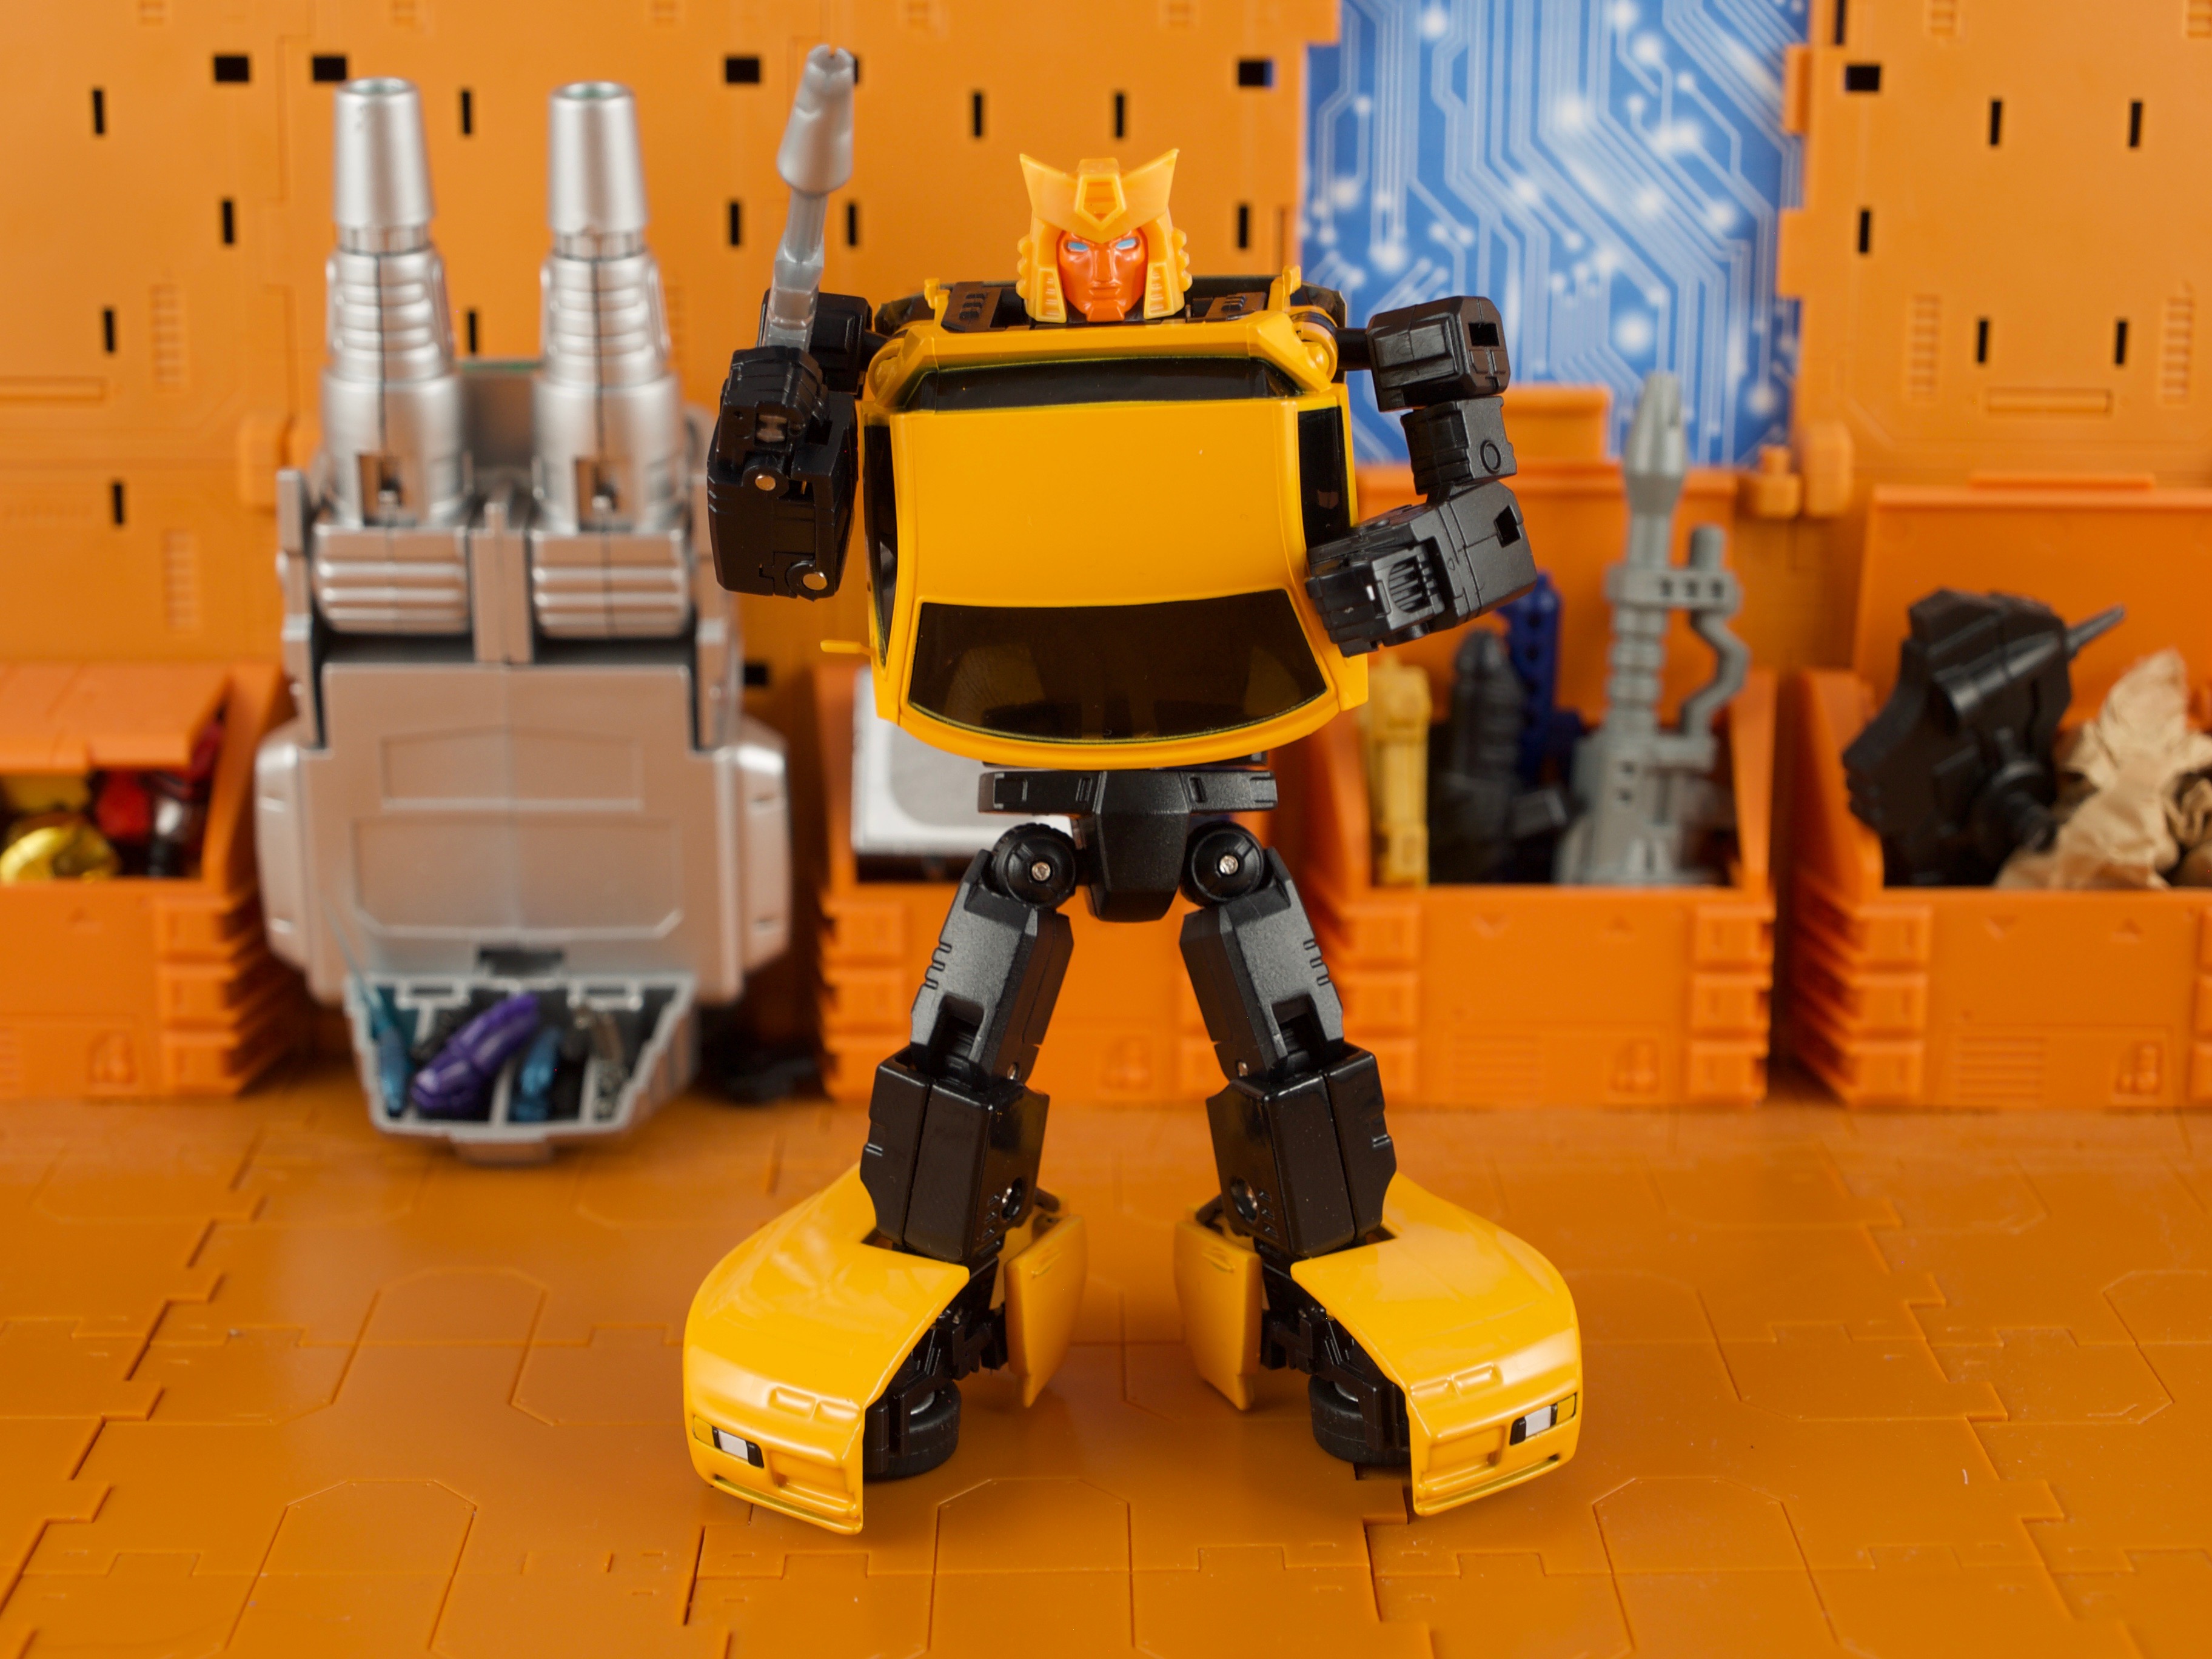 Hiccups robot mode